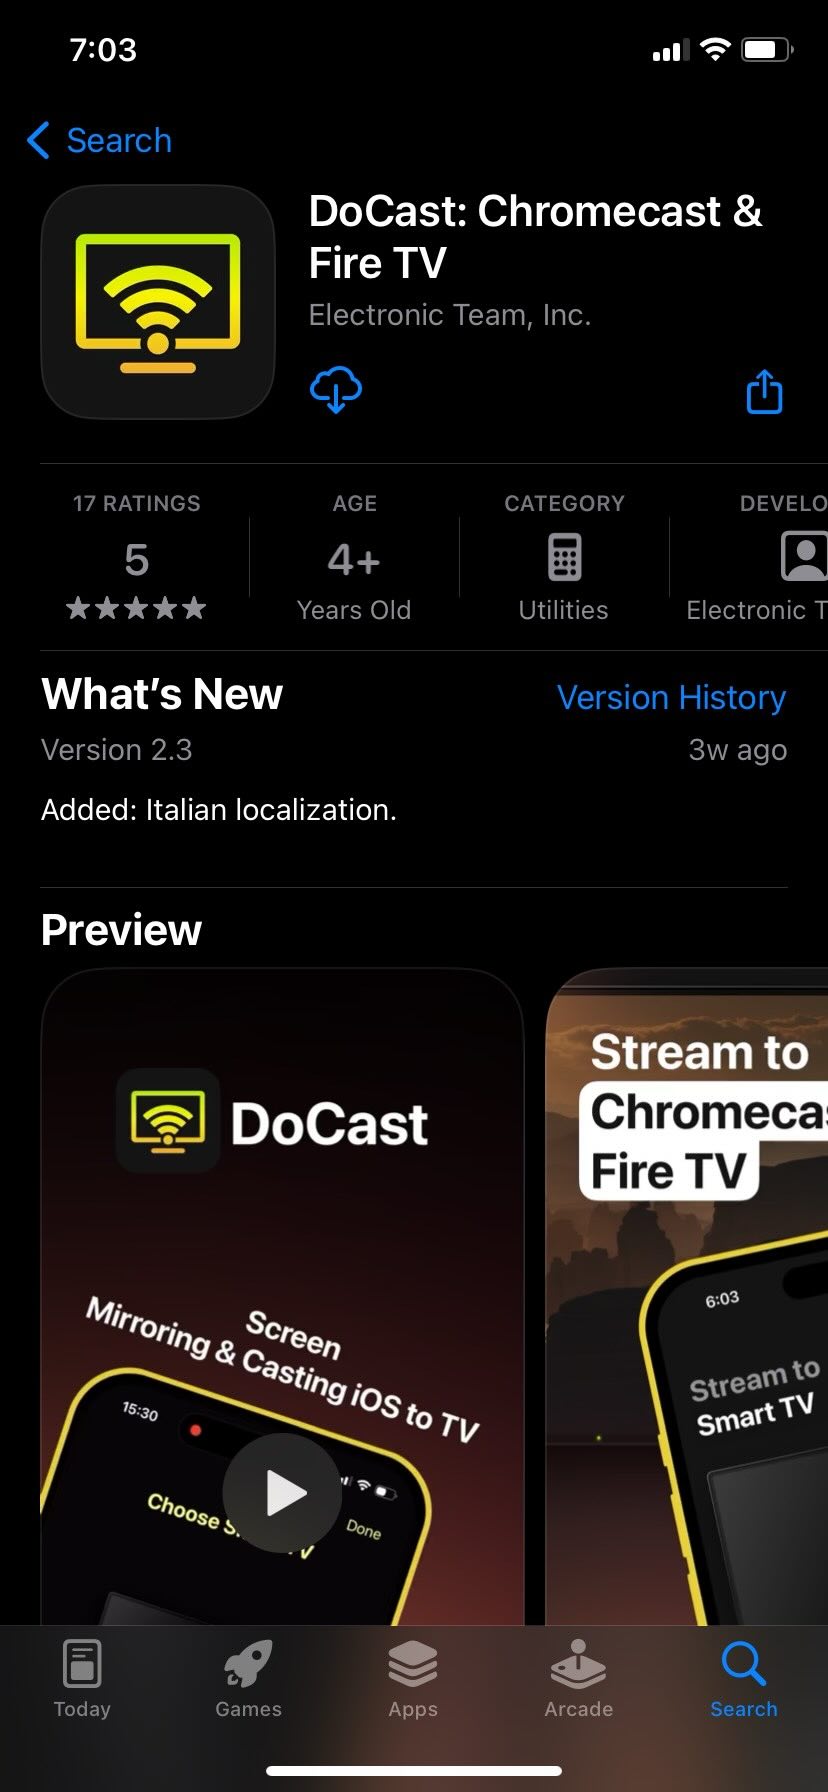 Download DoCast from the App Store and launch it